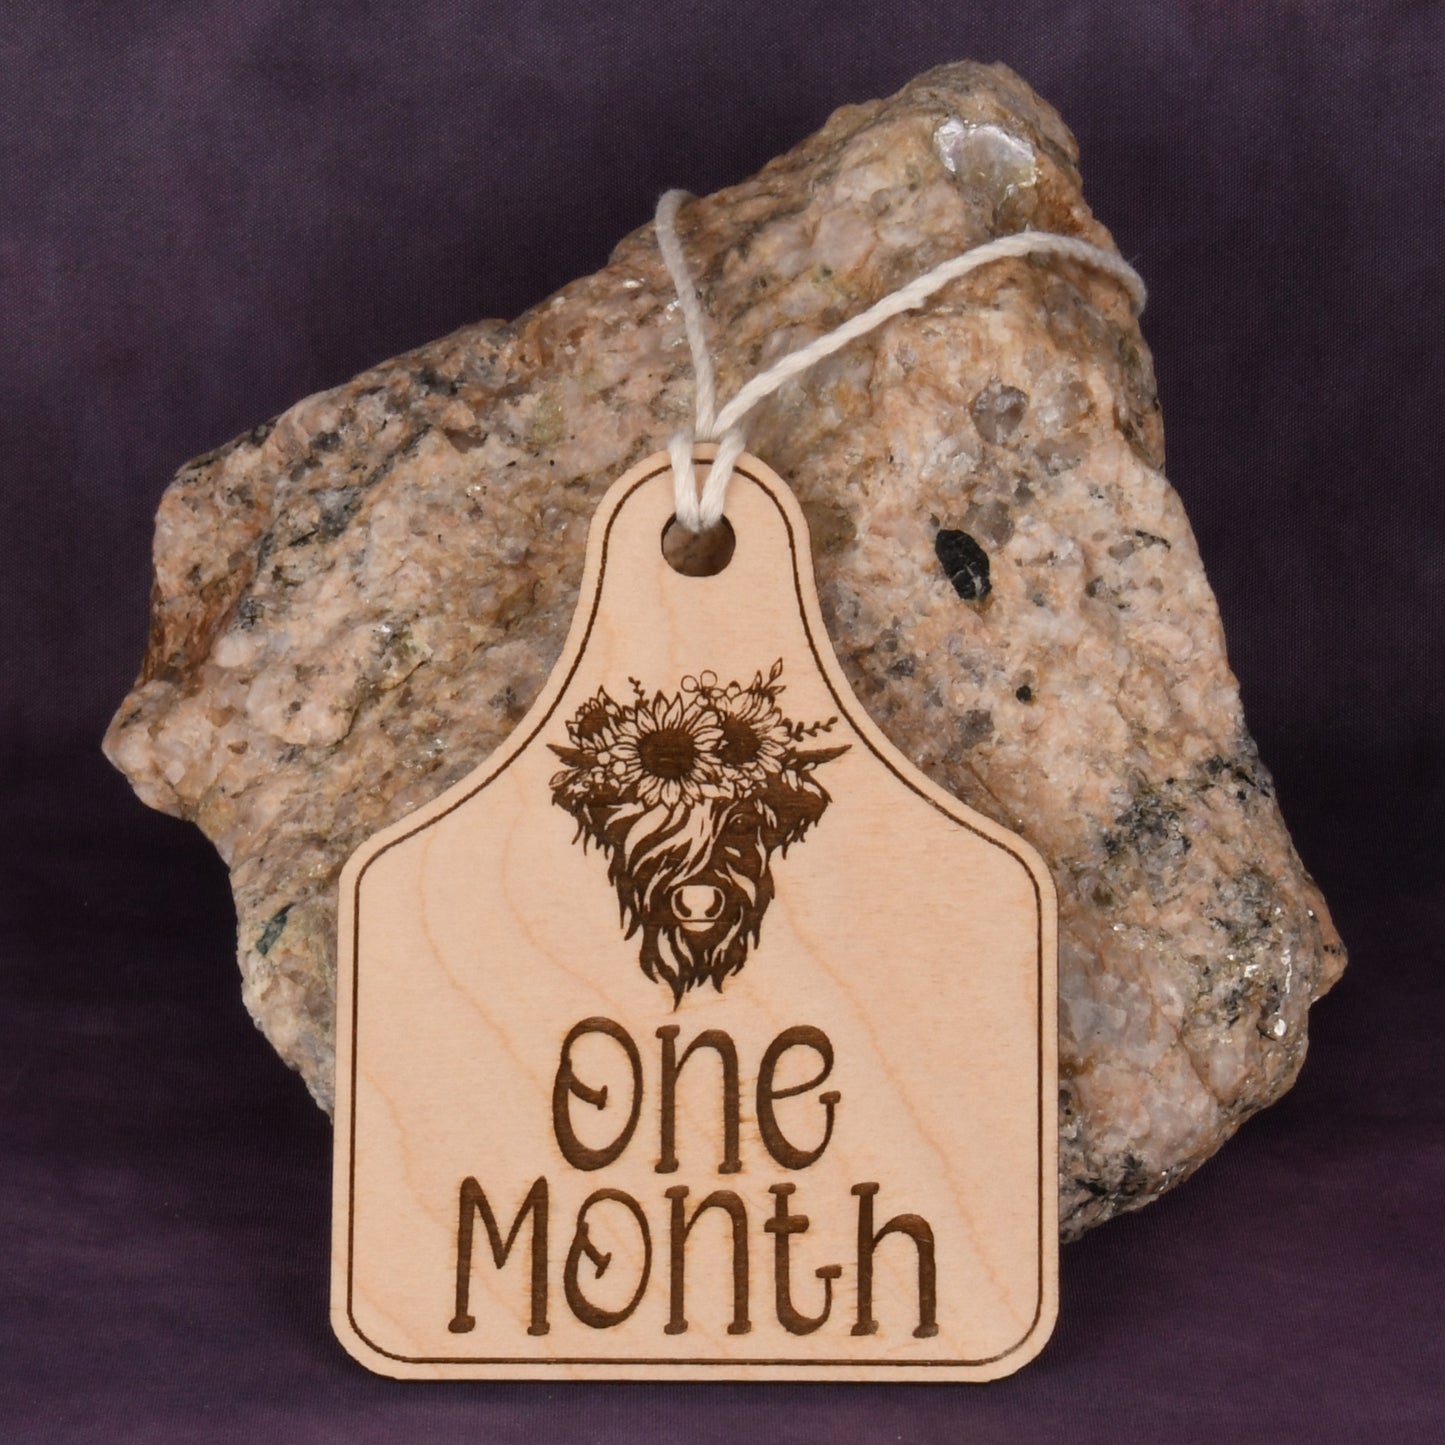 Large Highland Cow Farm Ear Tag With Age Months